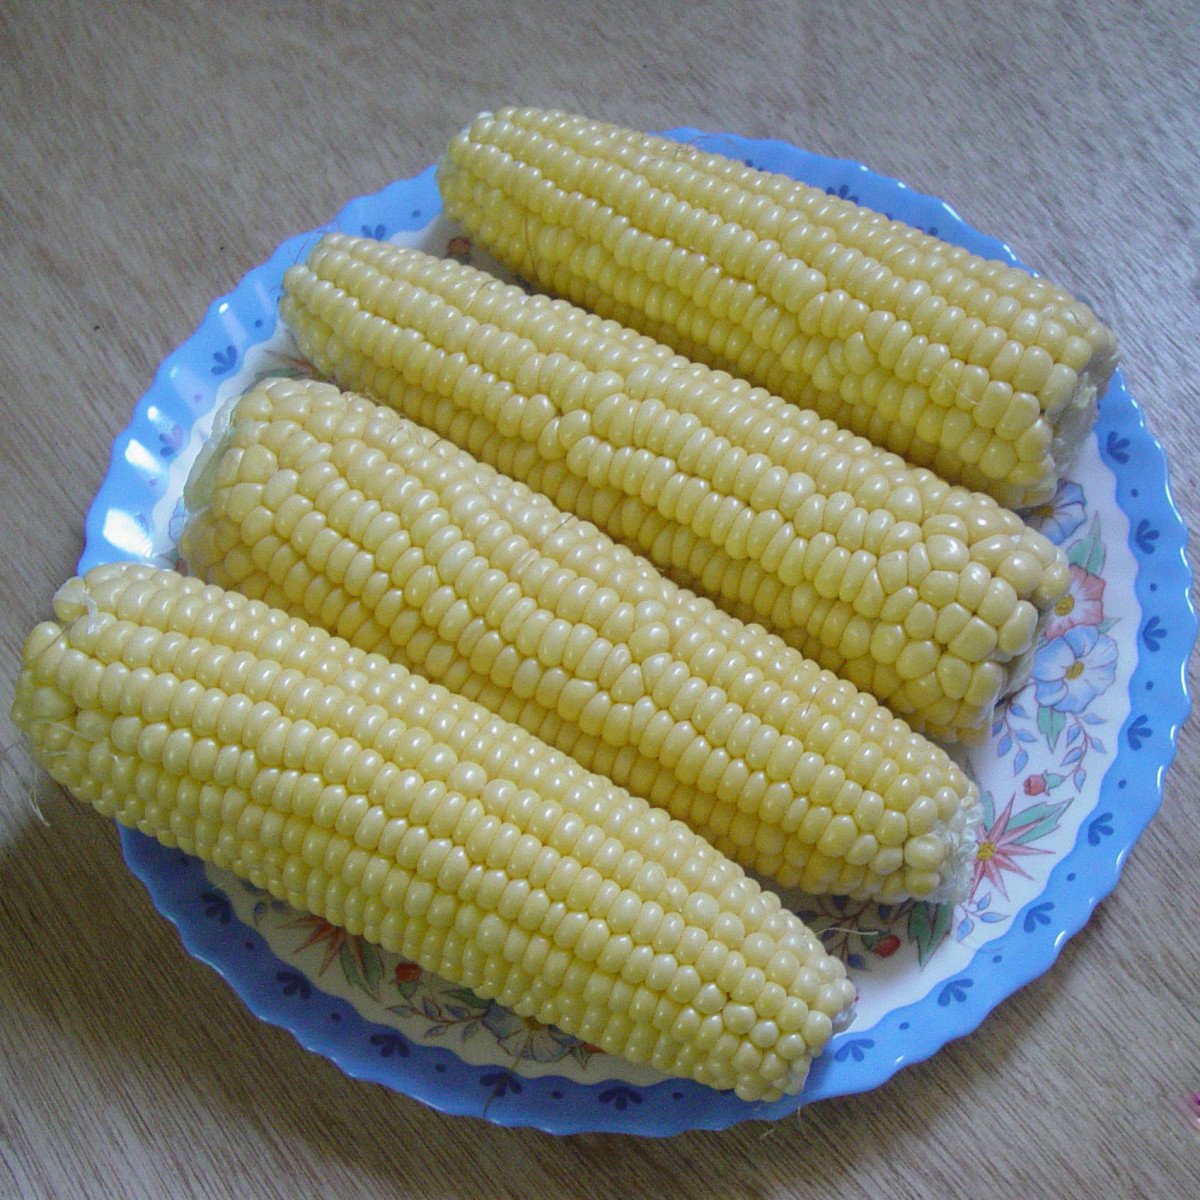 Amazing Corn Facts, Nutritional and Health Benefits of Corn or Maize